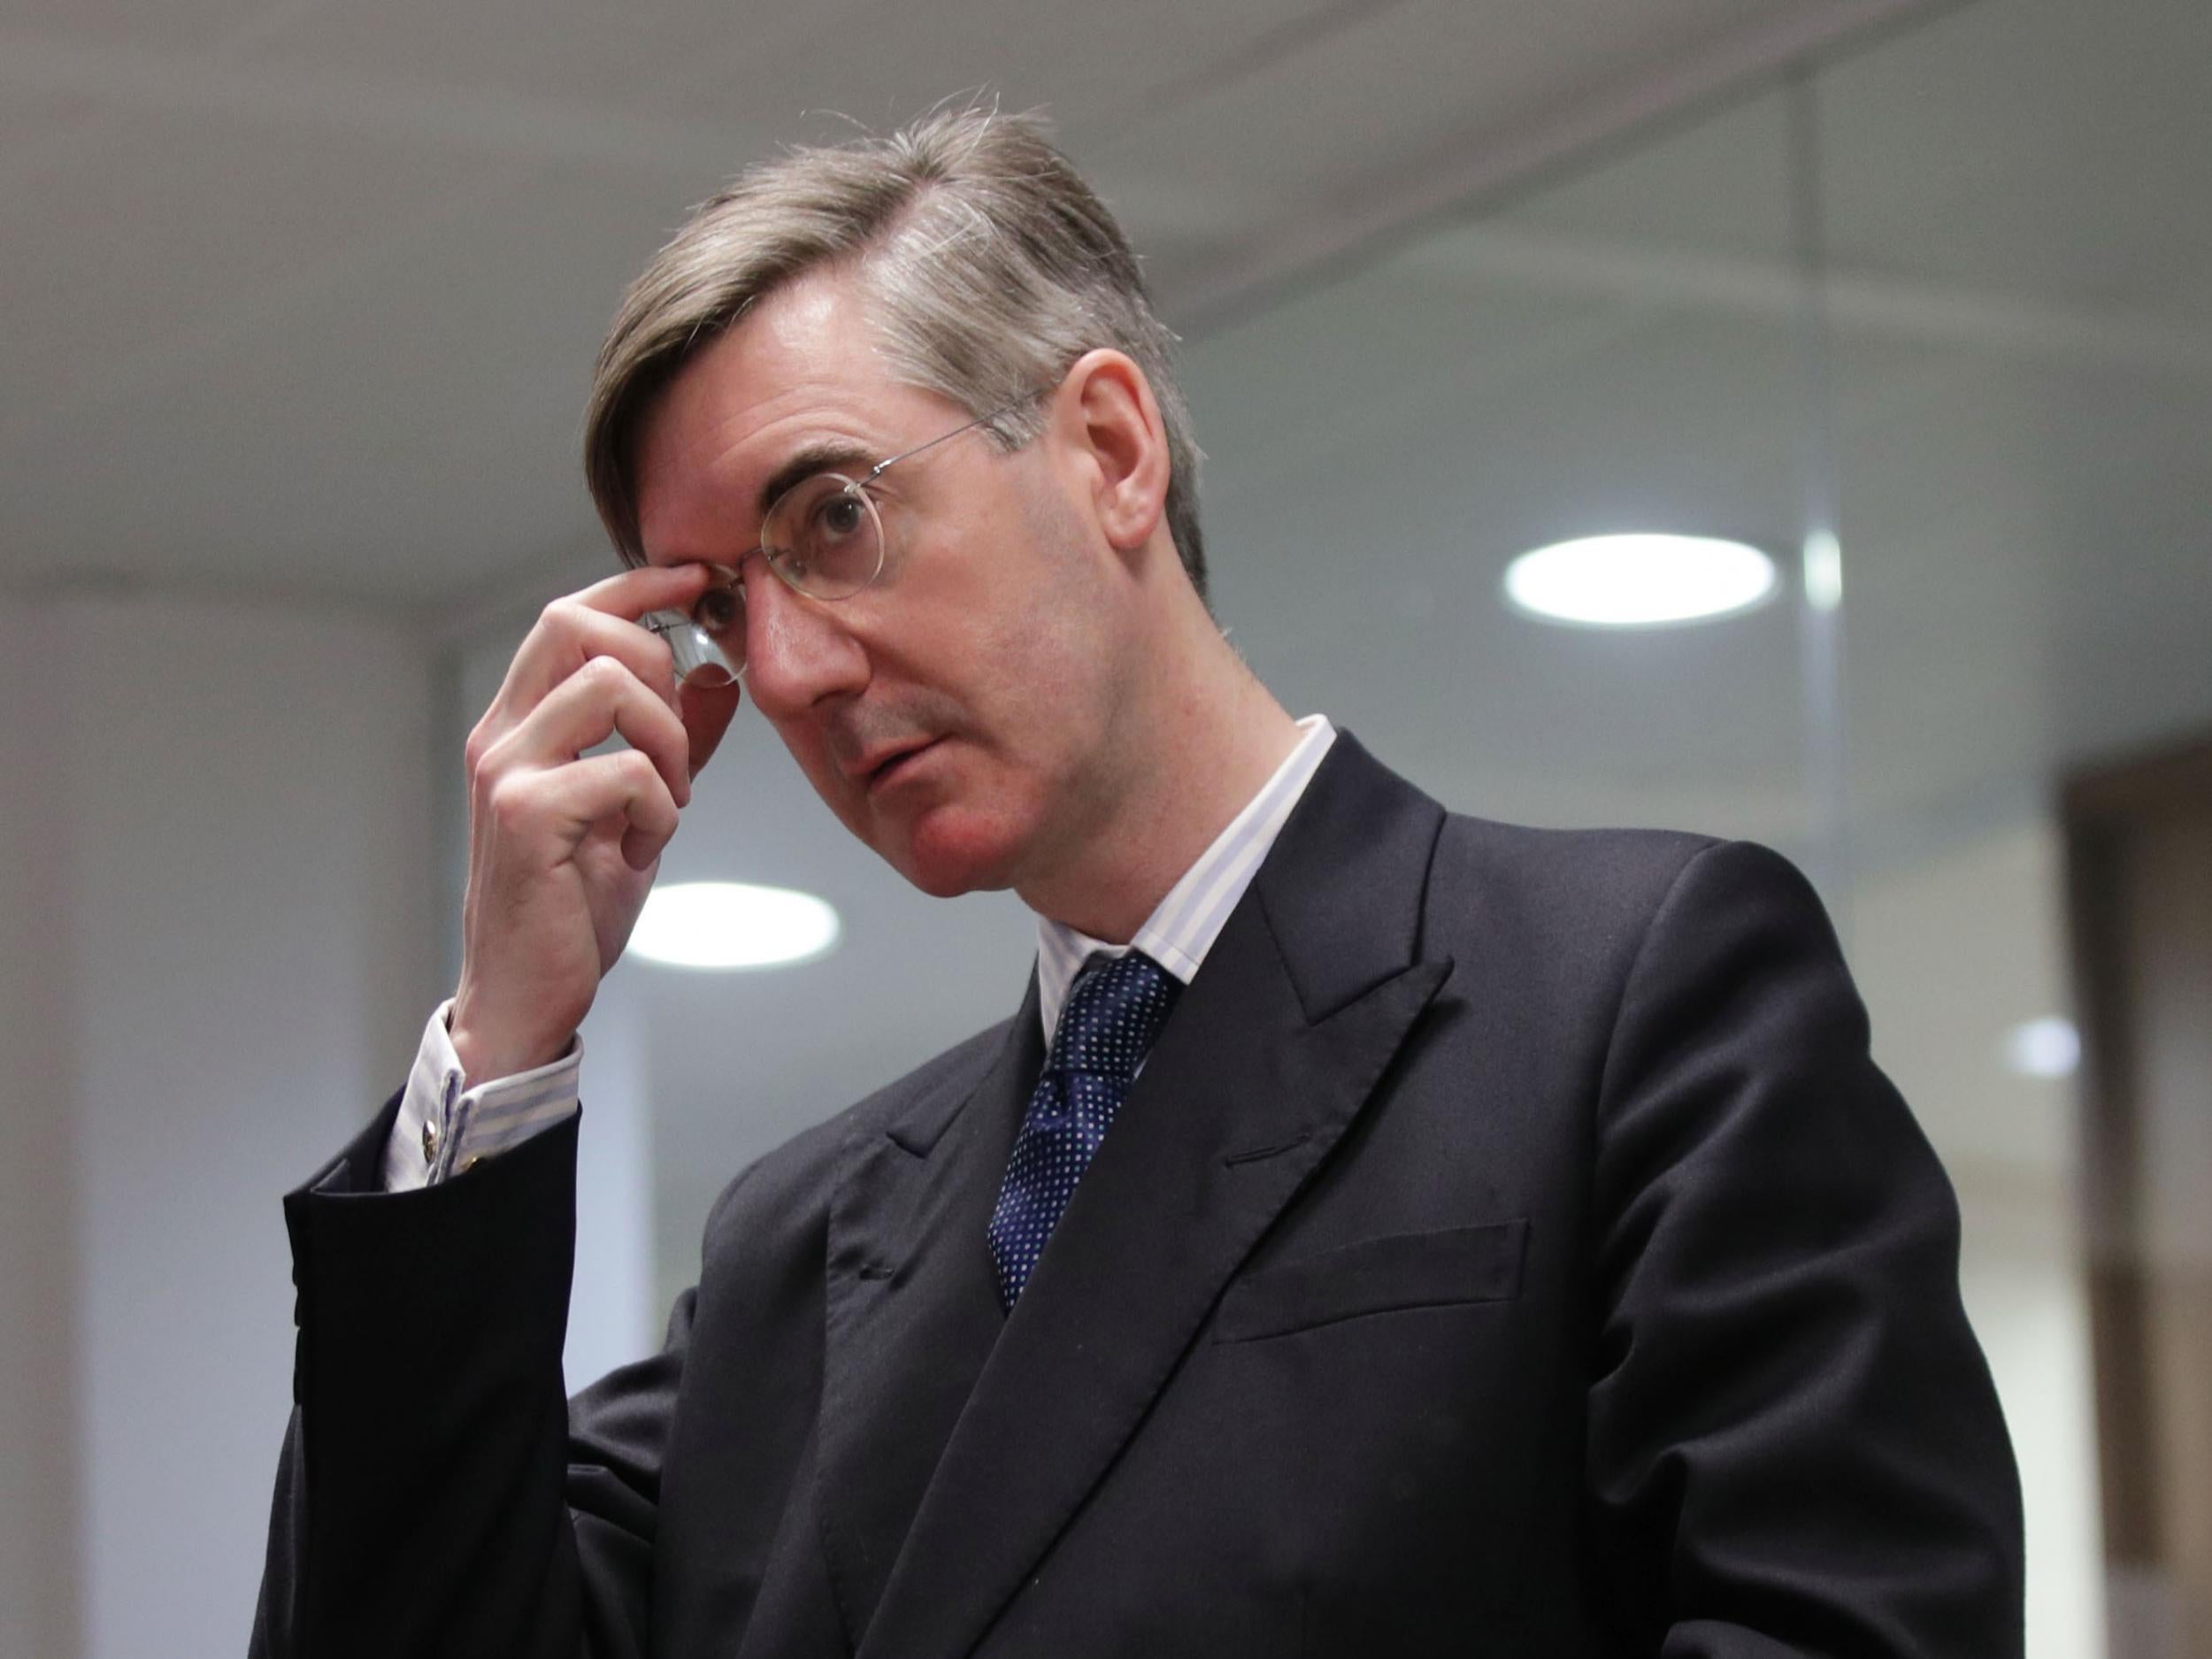 Posh boys such as Jacob Rees-Mogg have jumped eagerly on board the Brexit bandwagon